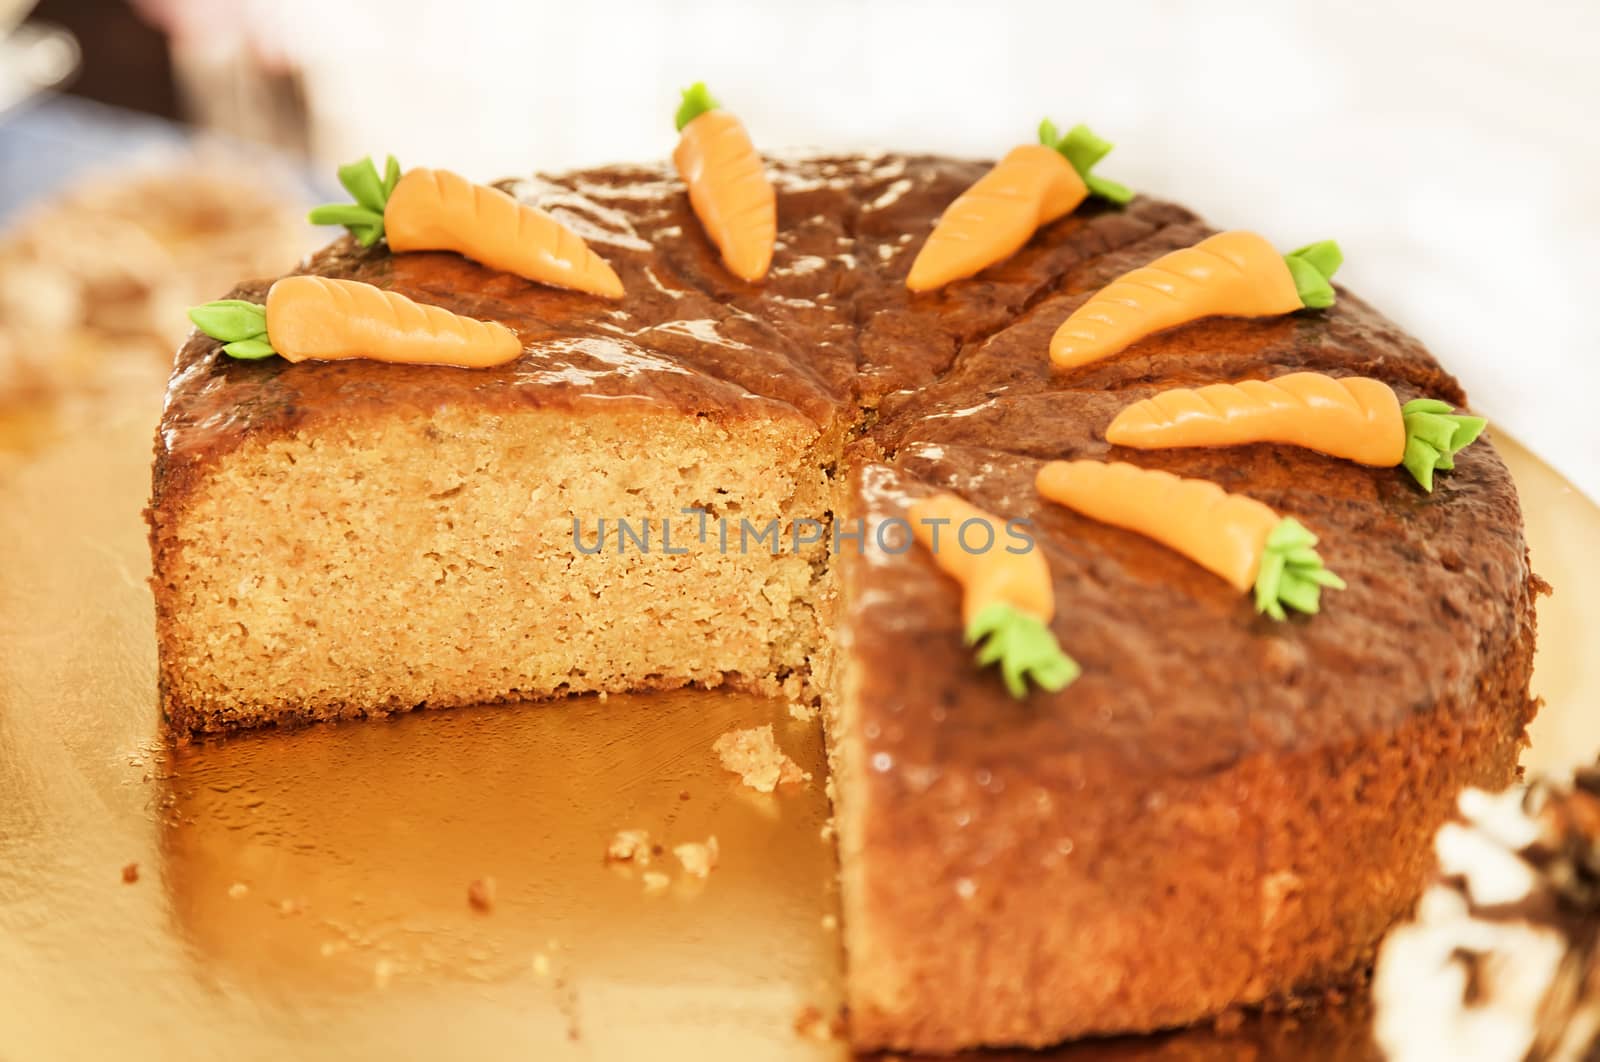 Carrot cake decorated with carrots on the top by RawGroup